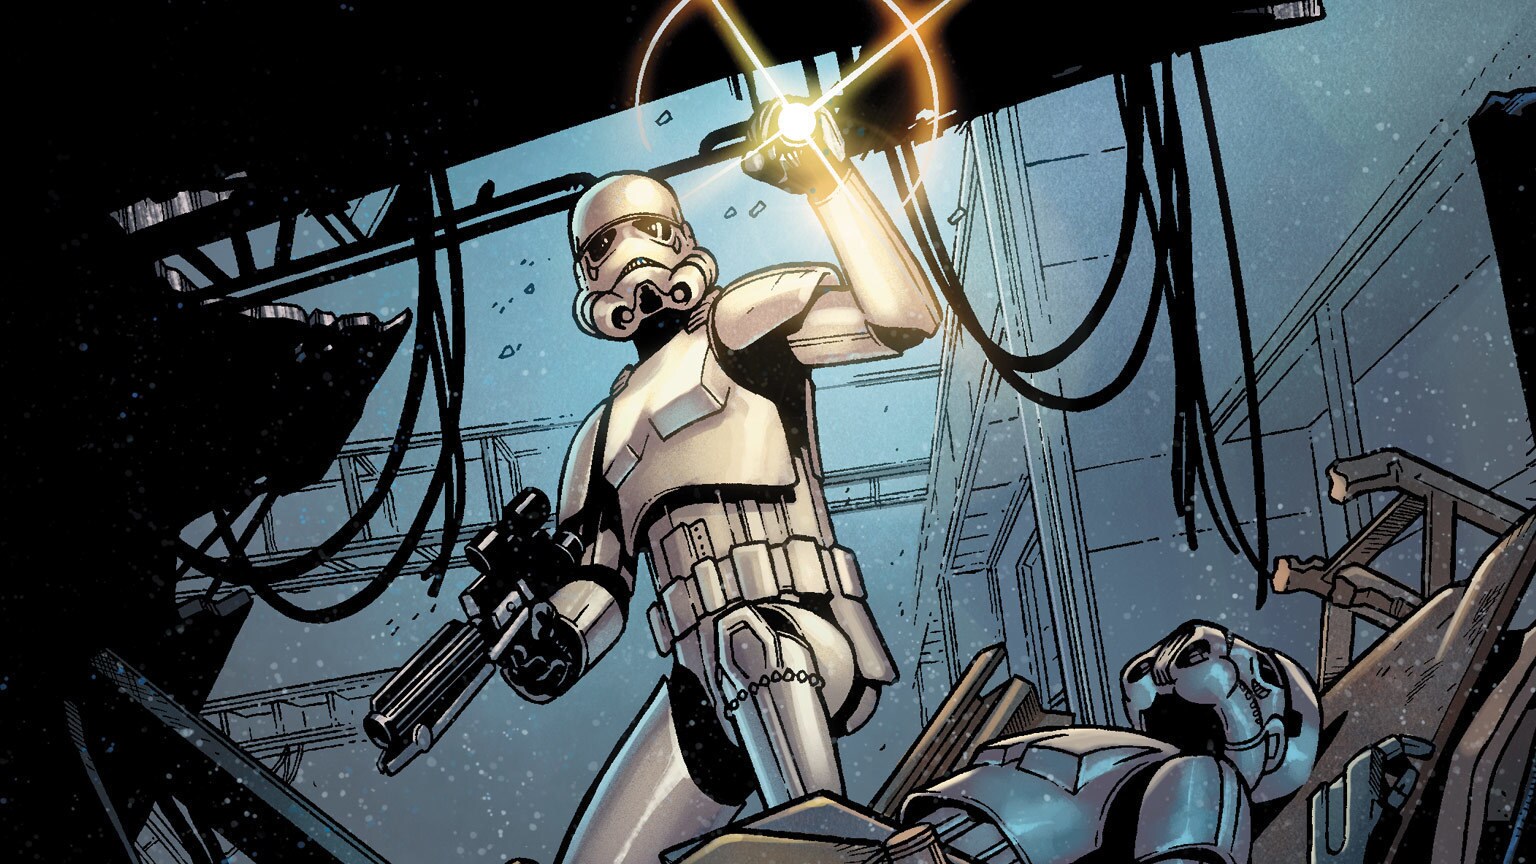 A Close Call Behind Enemy Lines in Marvel’s Star Wars #21 – Exclusive Preview